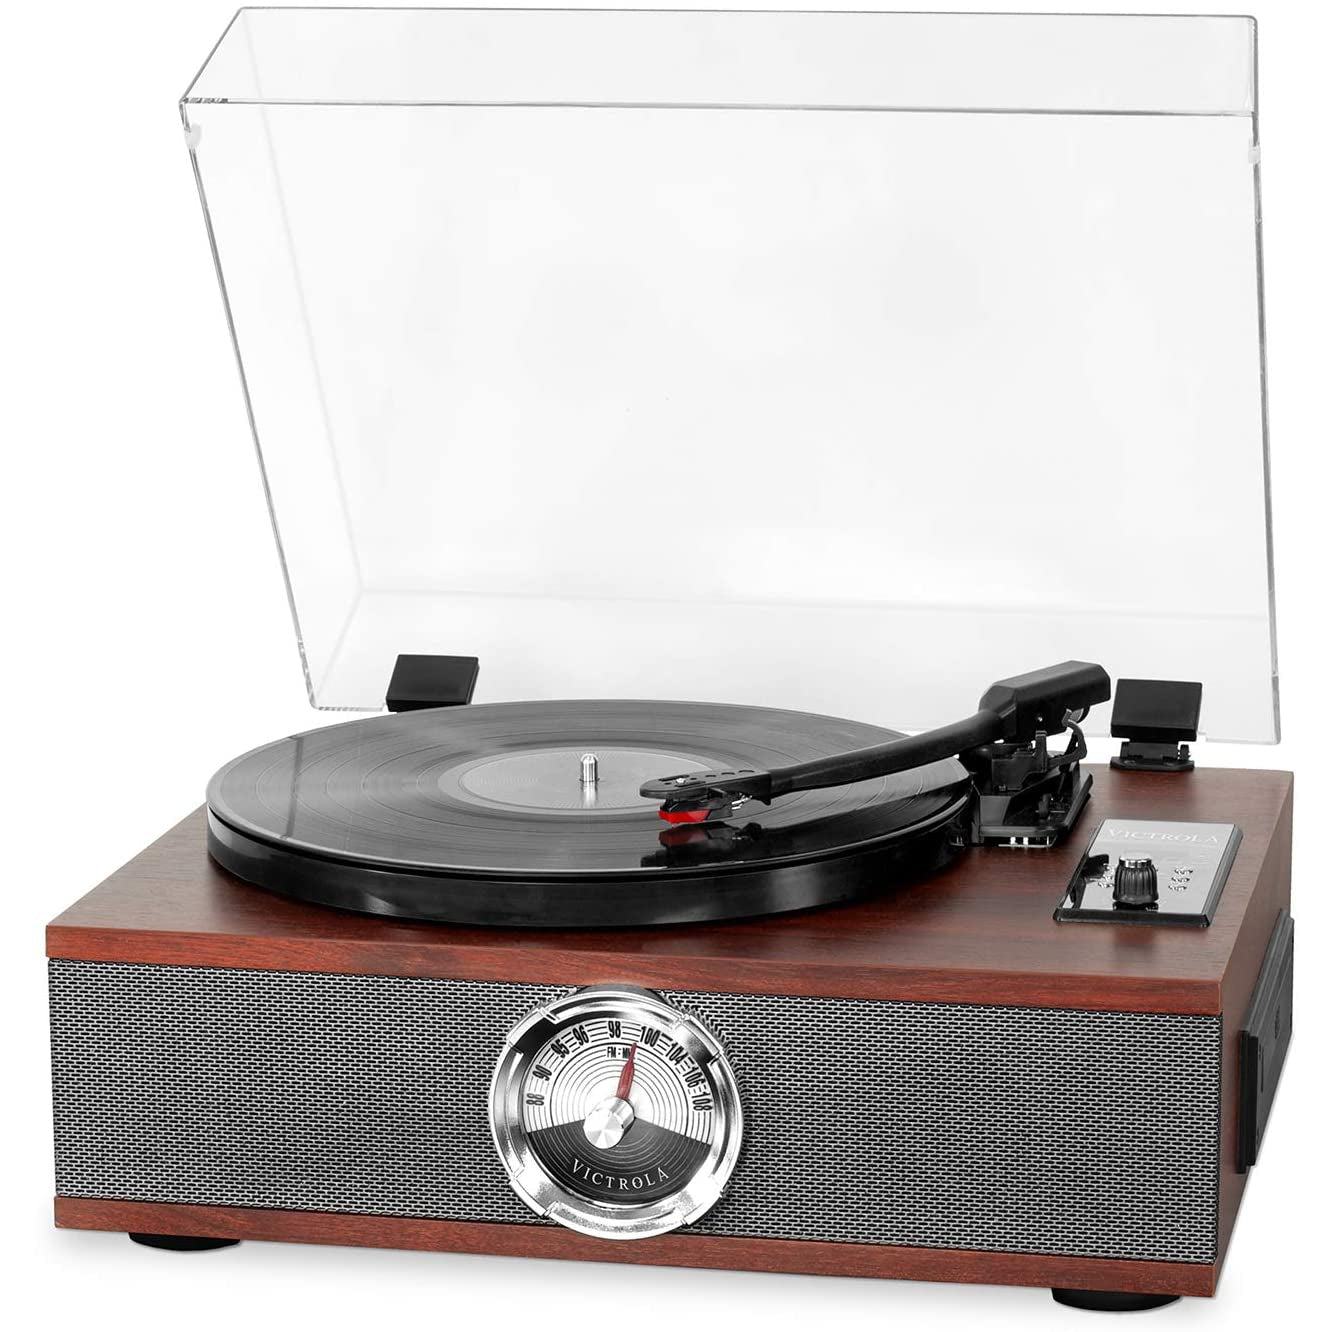 Victrola Park Avenue 5 in 1 Wood Record Player with 3-Speed Turntable - Espresso